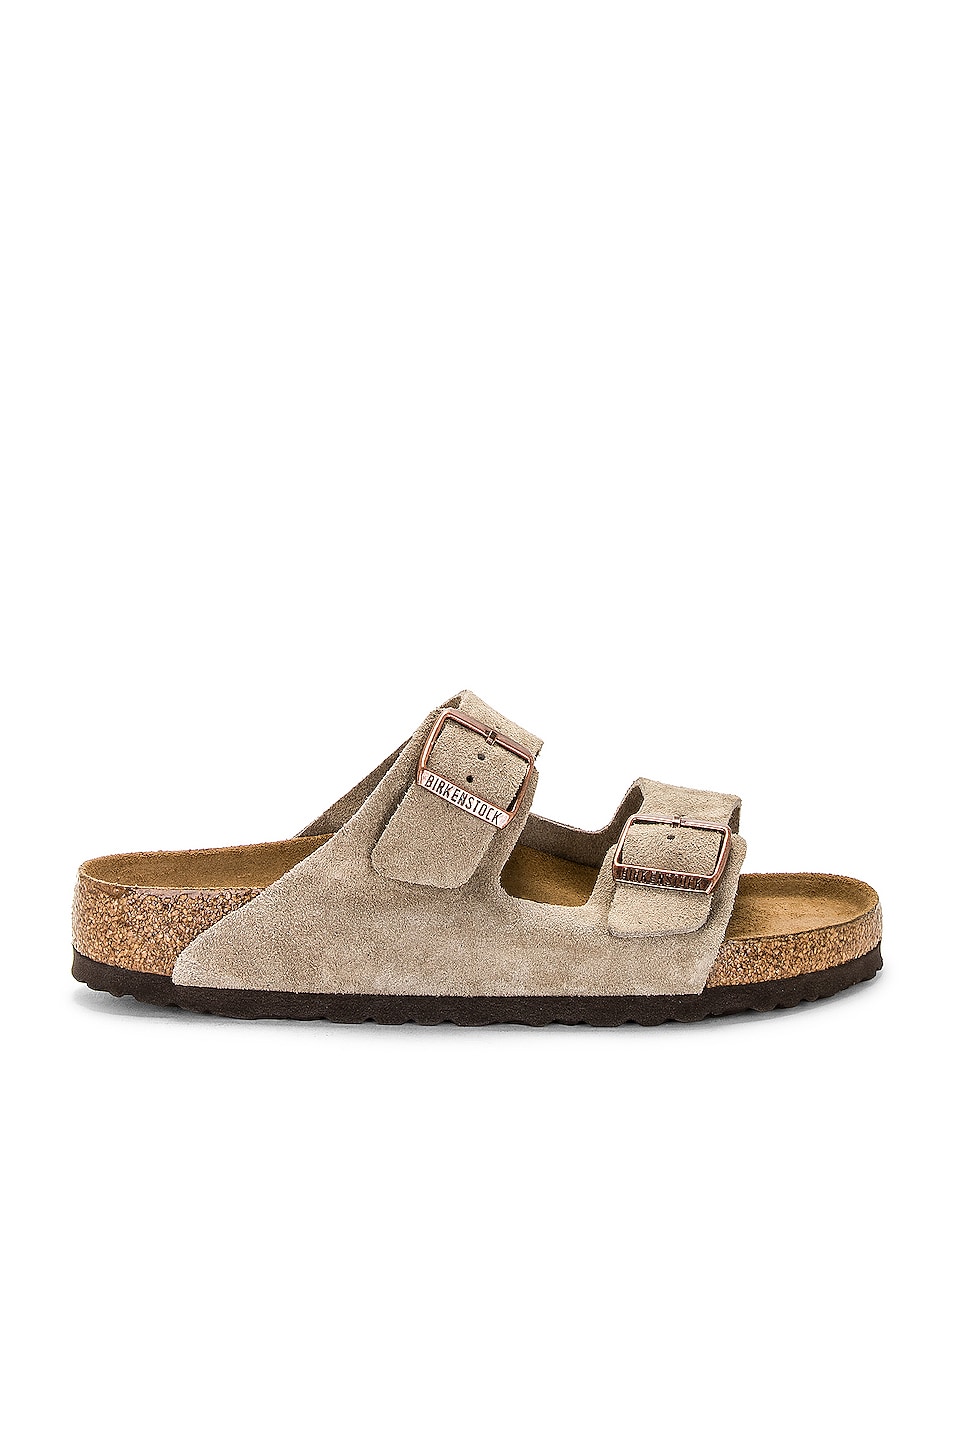 Arizona Soft Footbed in Taupe